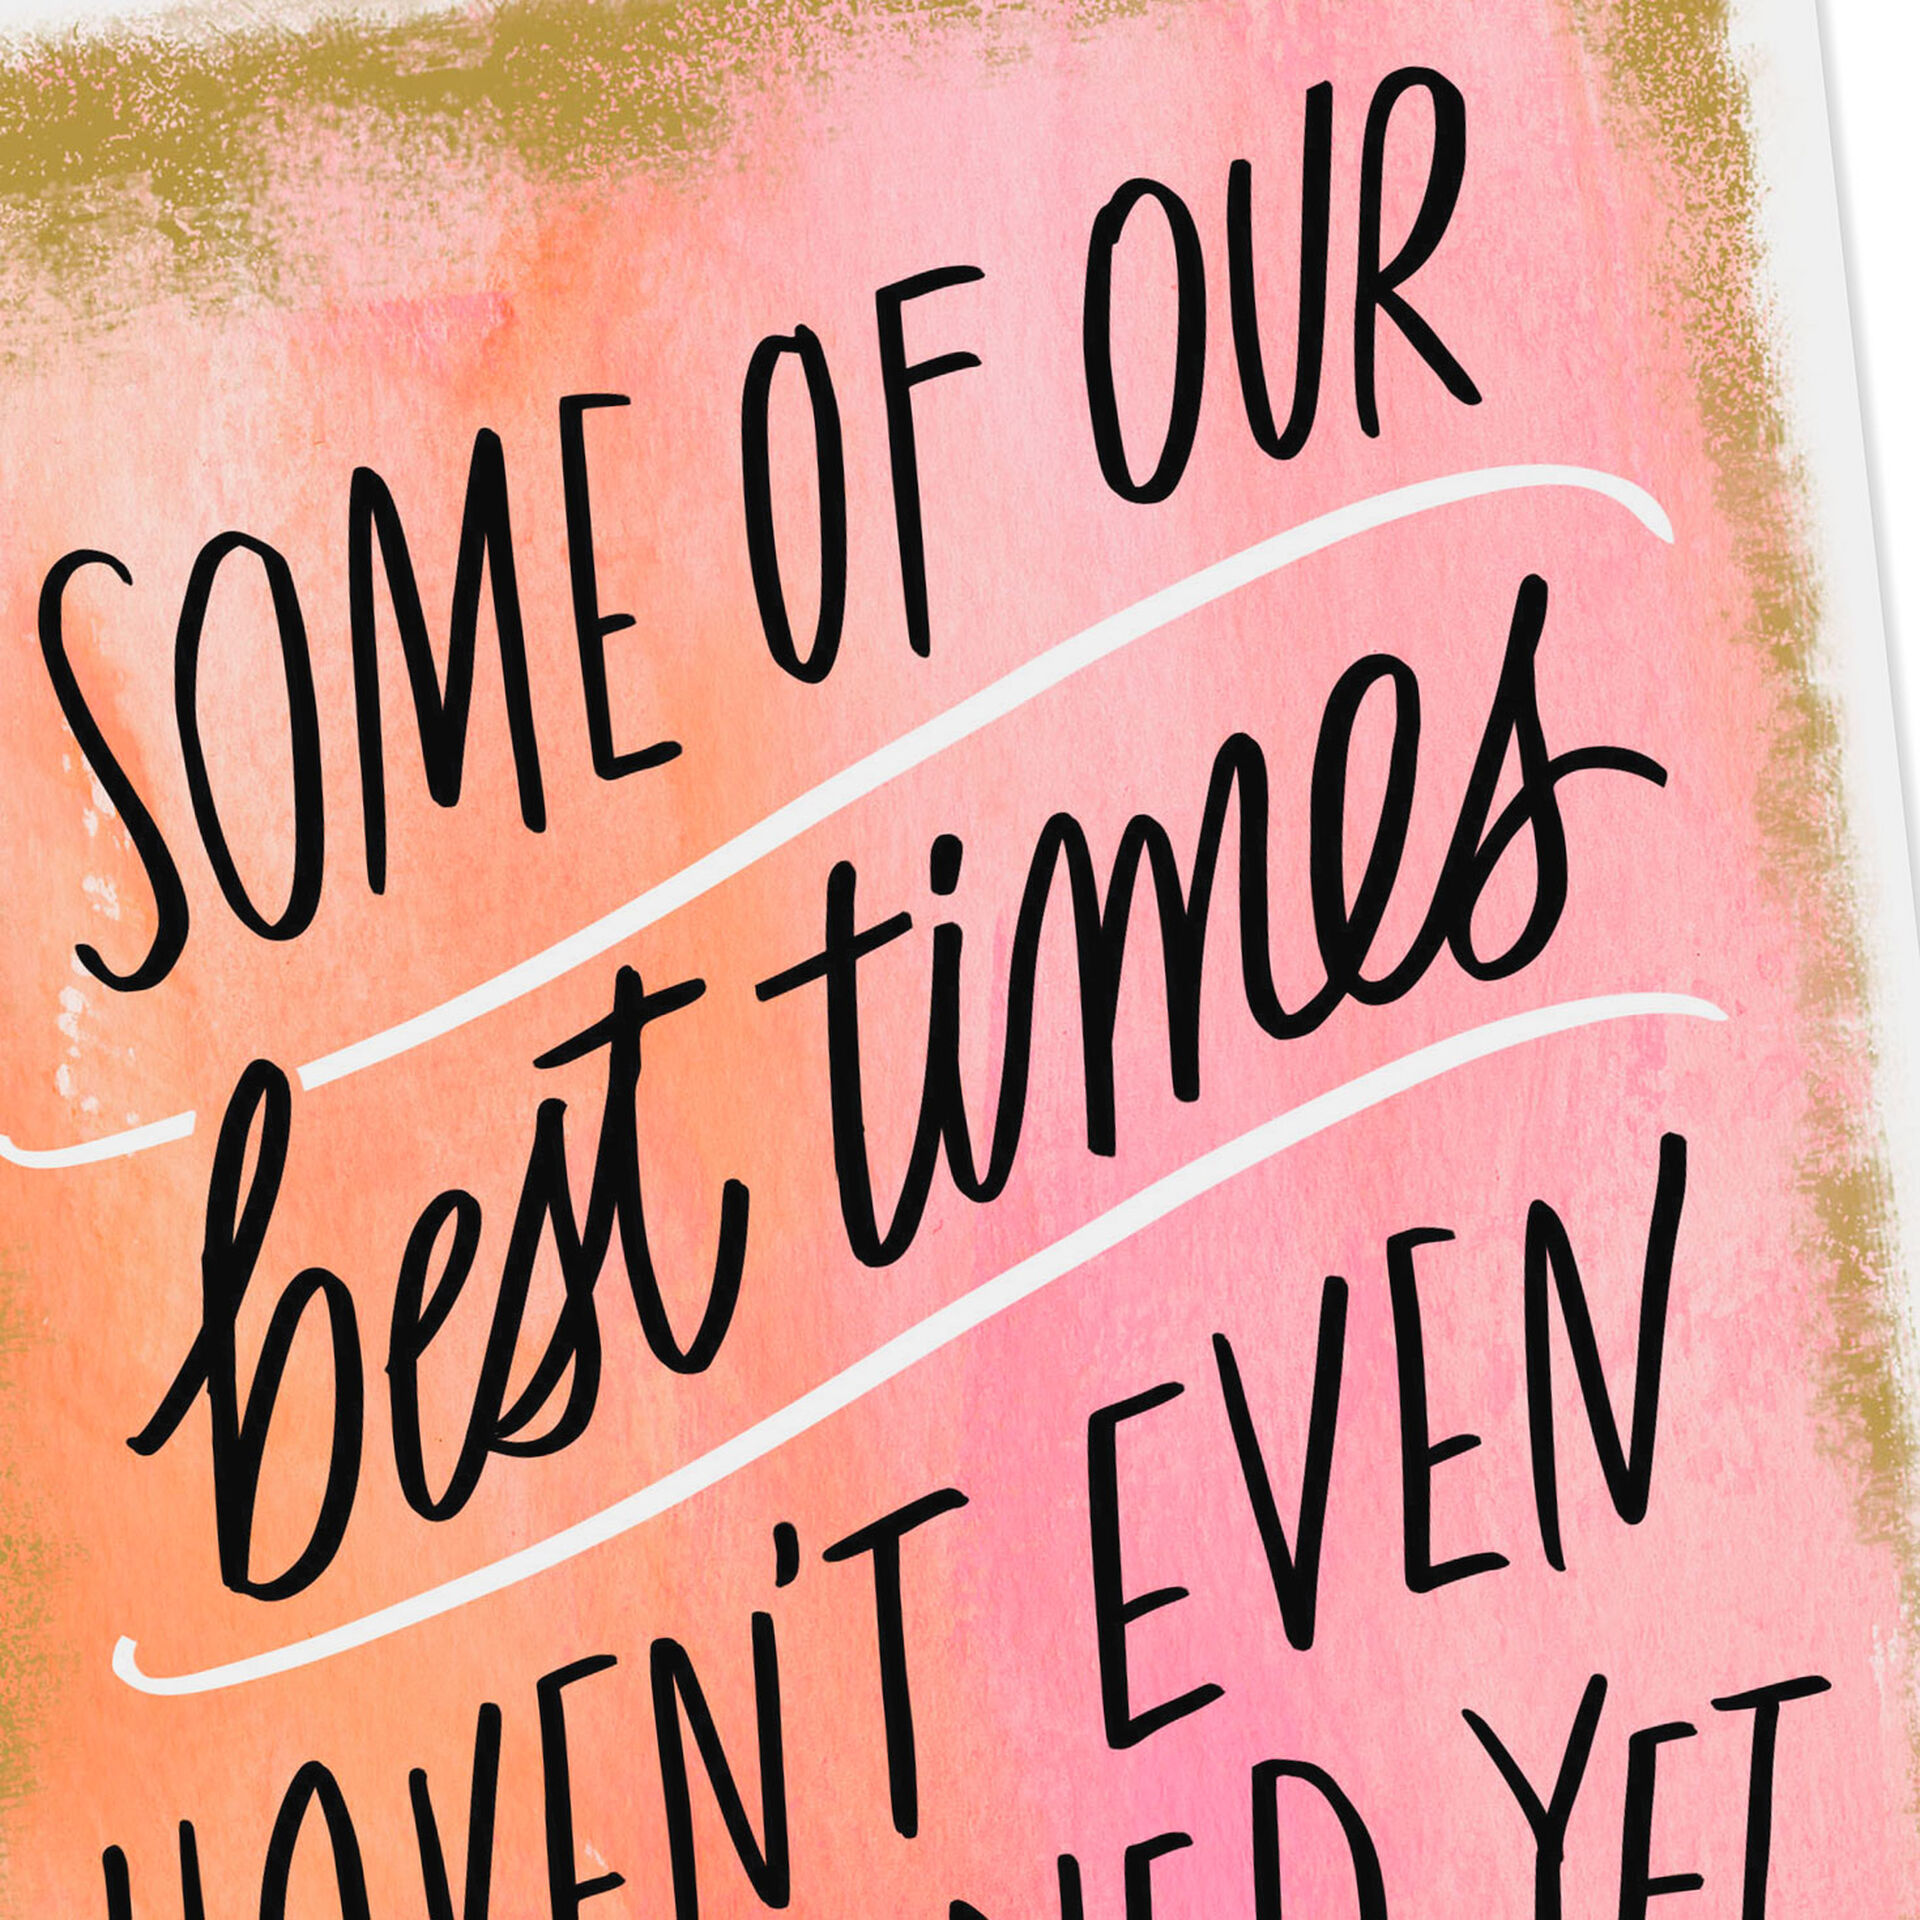 Best-Is-Yet-to-Come-Blank-Encouragement-Card_299RJB1109_03